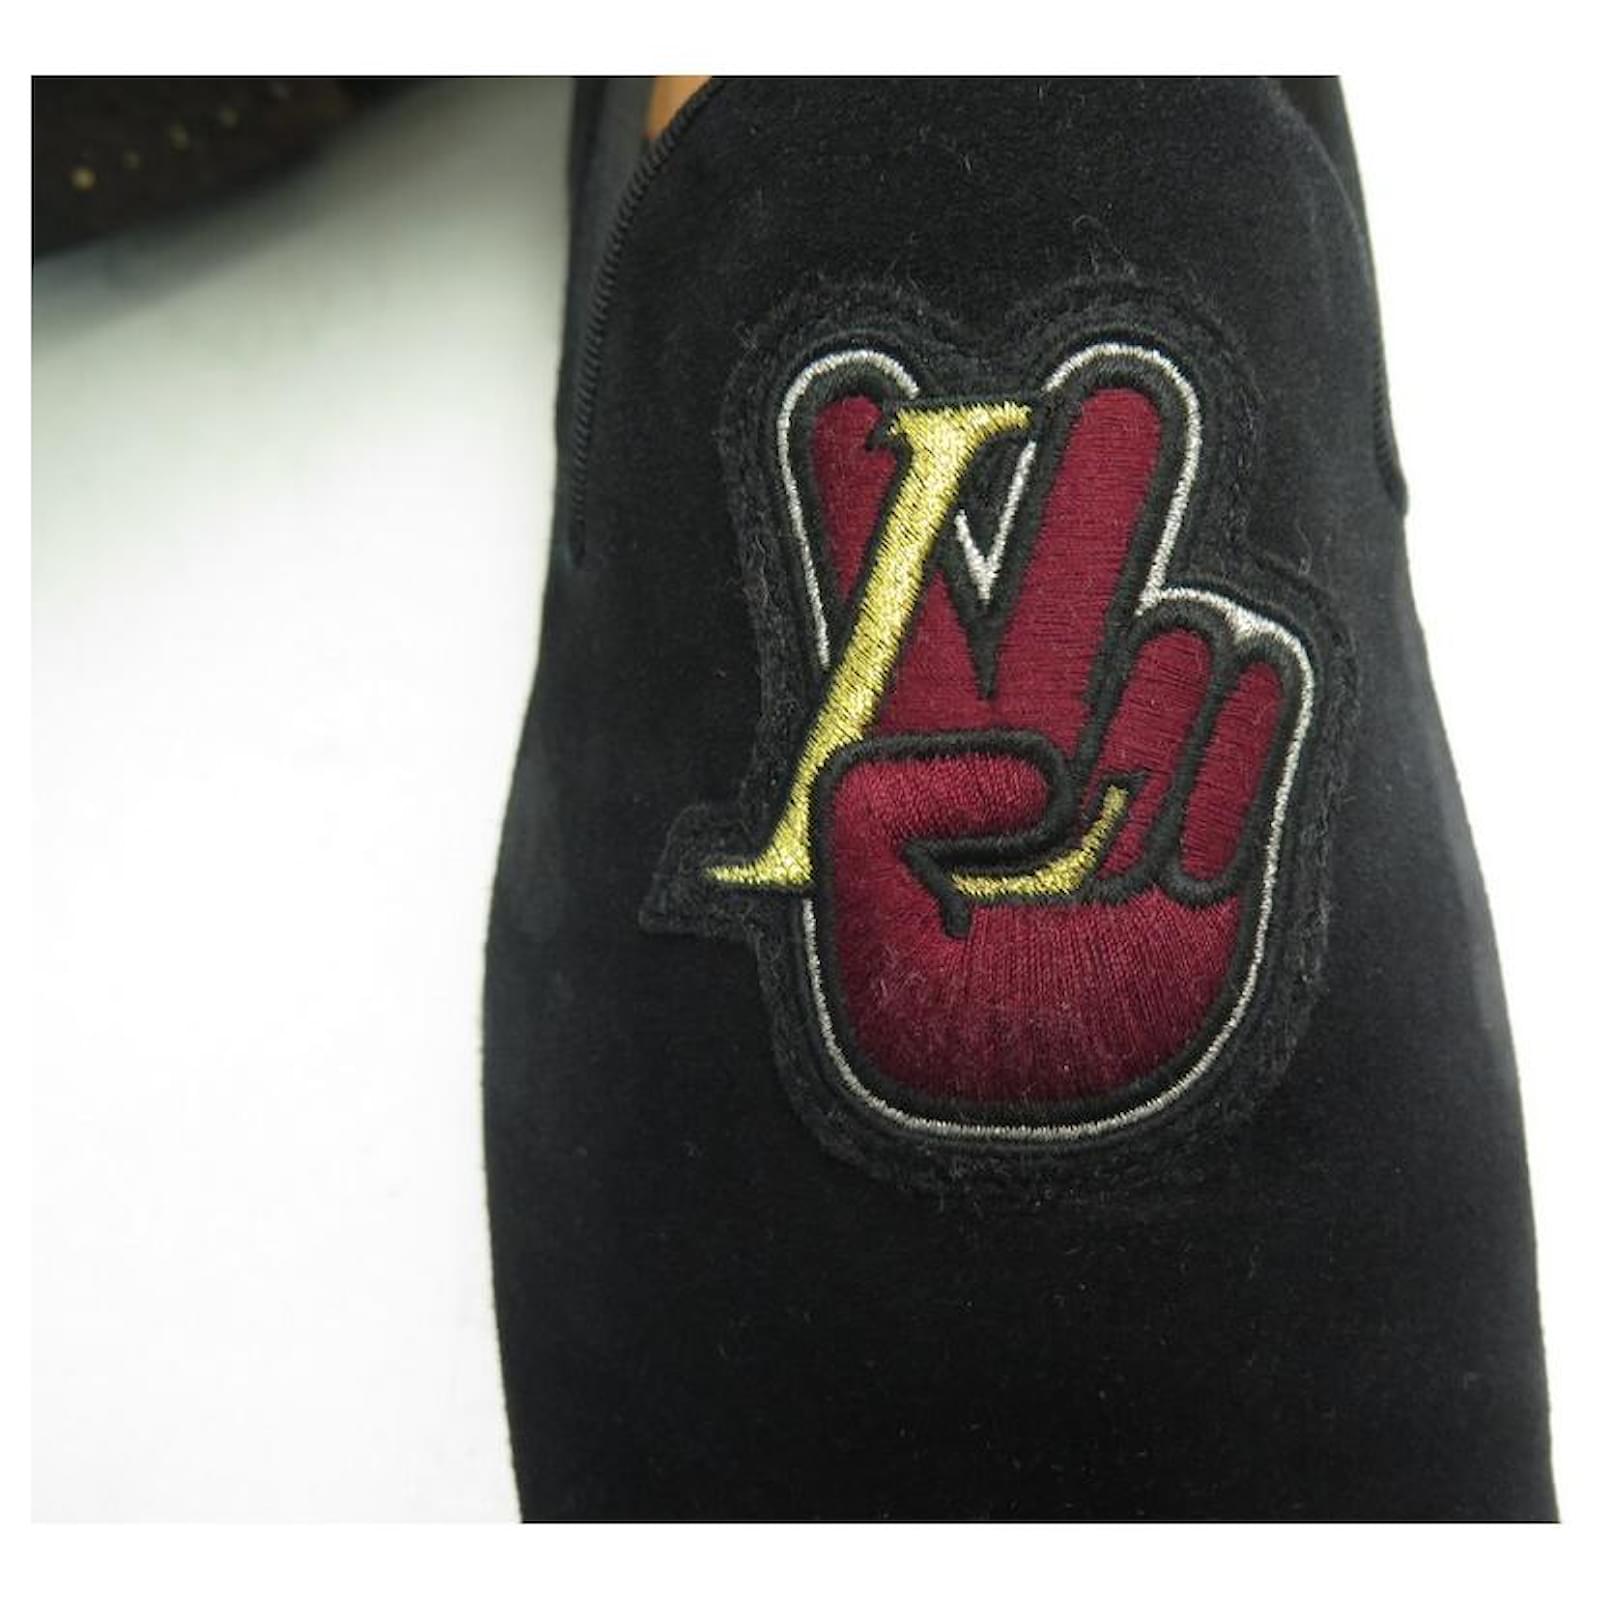 Louis Vuitton Black Suede LV Logo Embroidered Smoking Slippers